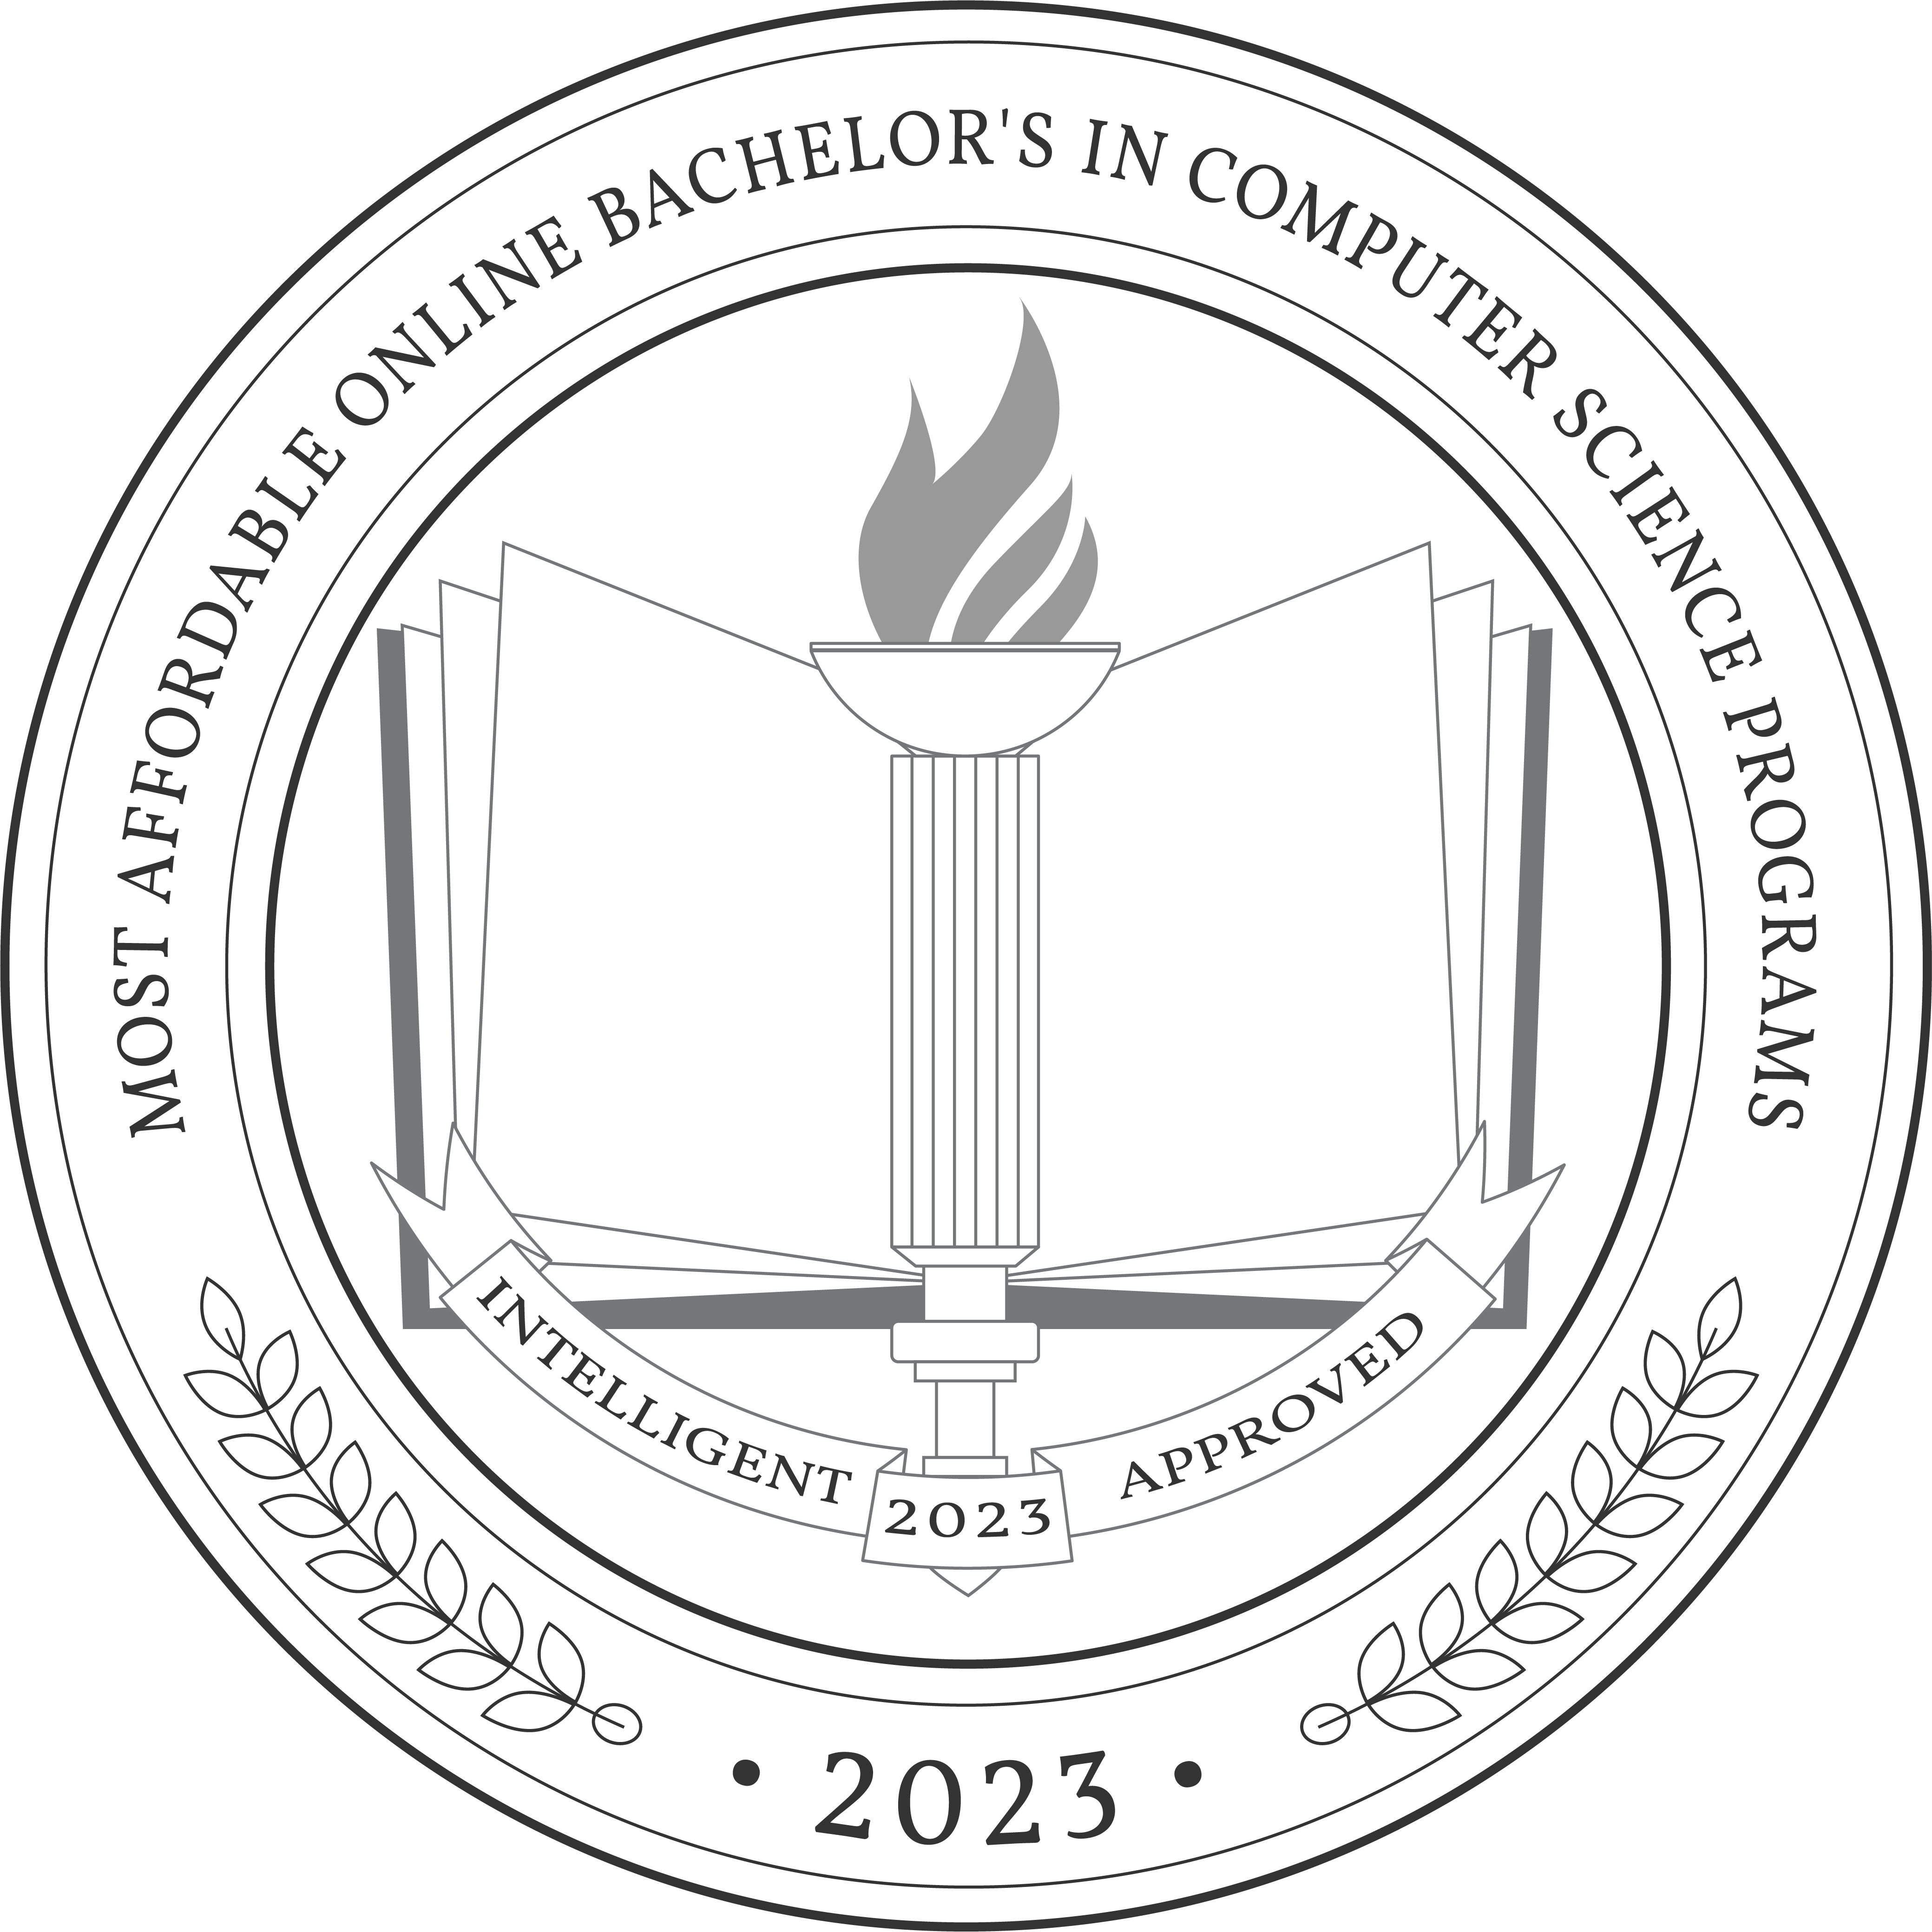 Most Affordable Online Bachelor's in Computer Science Programs Badge